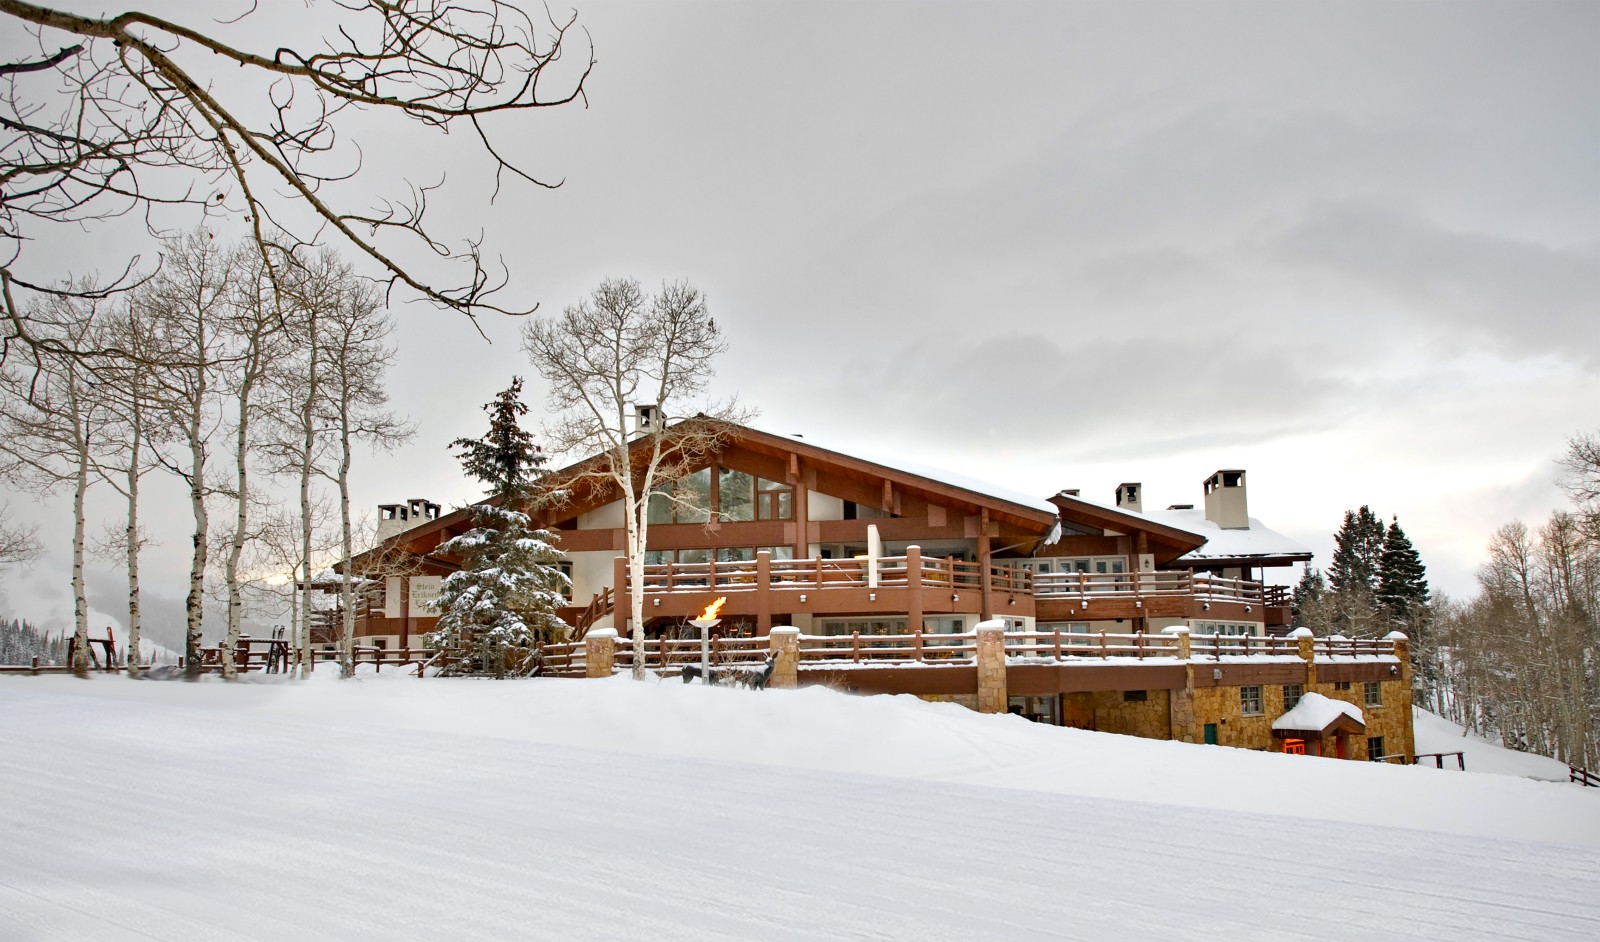 Taking Advantage of the Silver Lining at Stein Eriksen Lodge